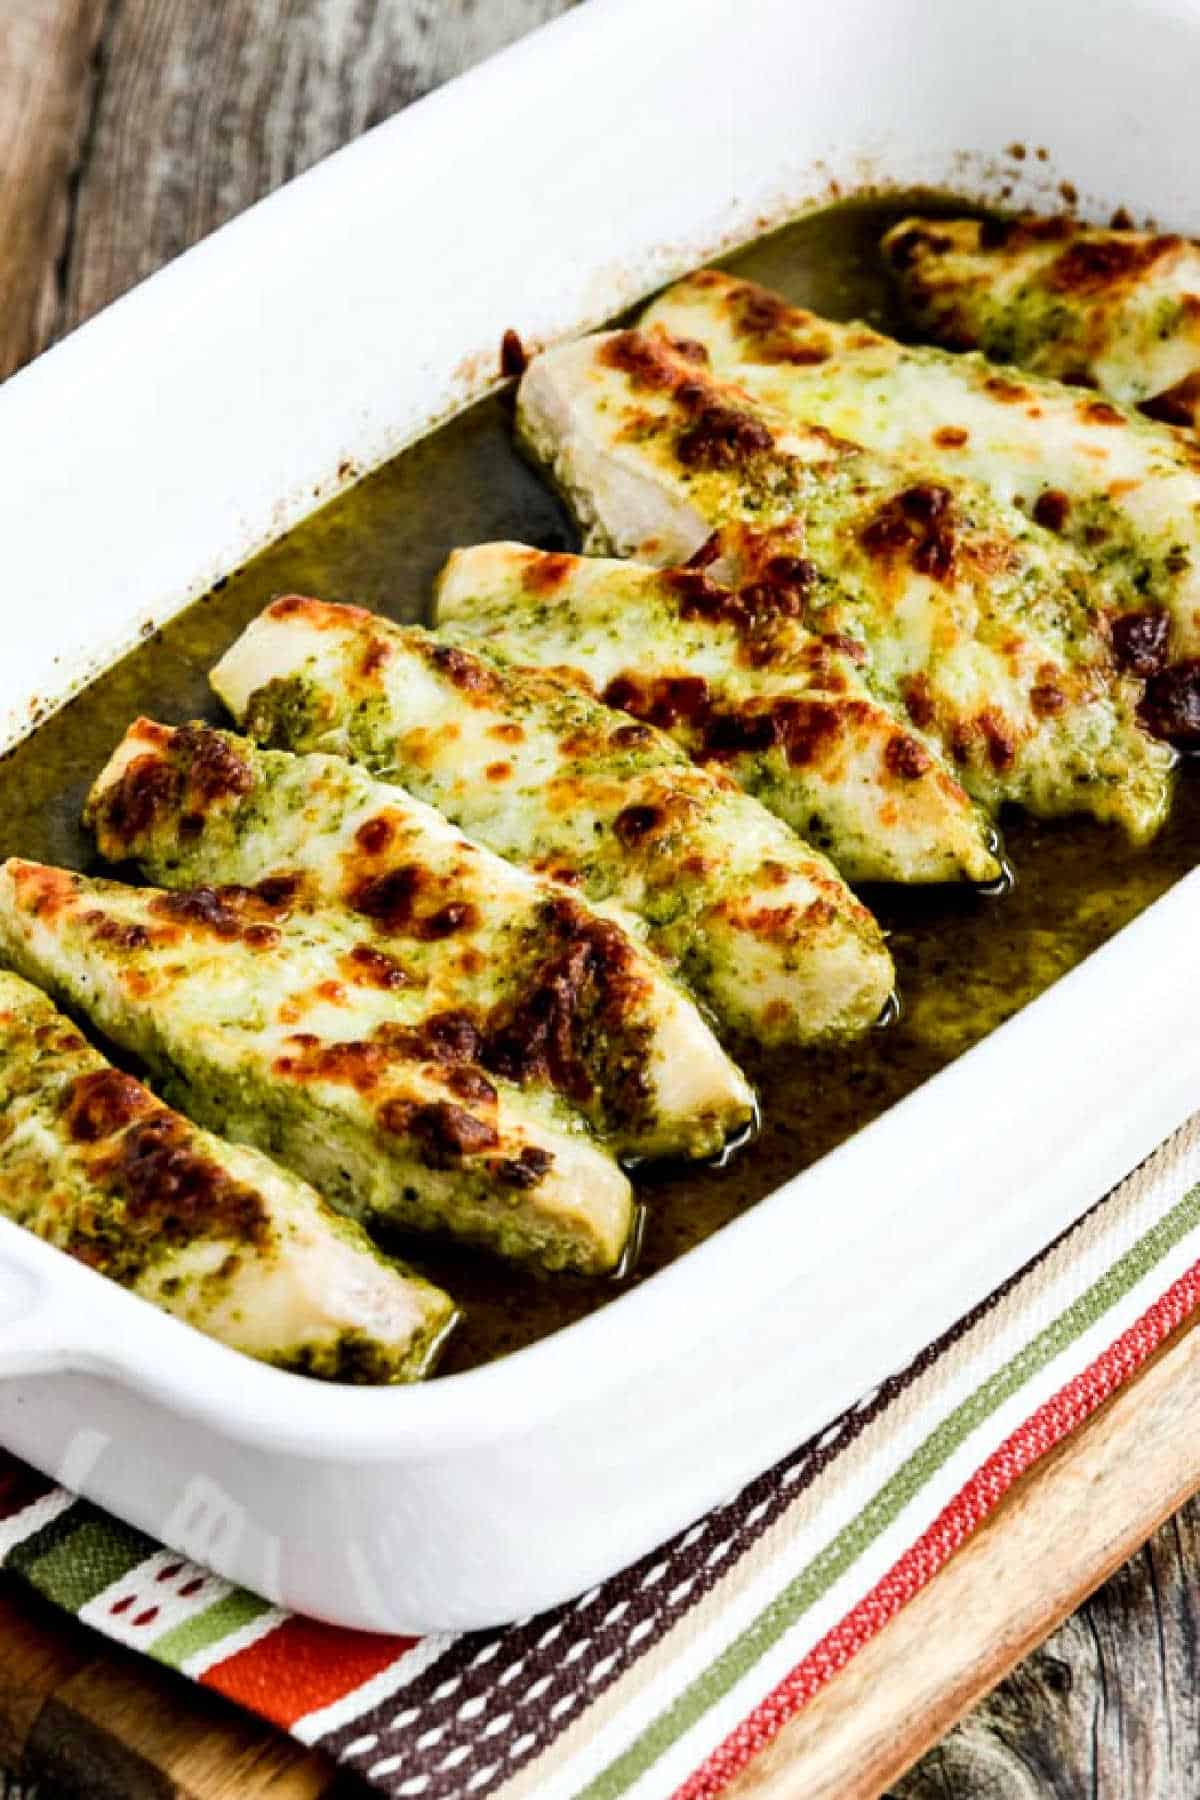 Easy Baked Pesto Chicken shown in baking dish with melted cheese